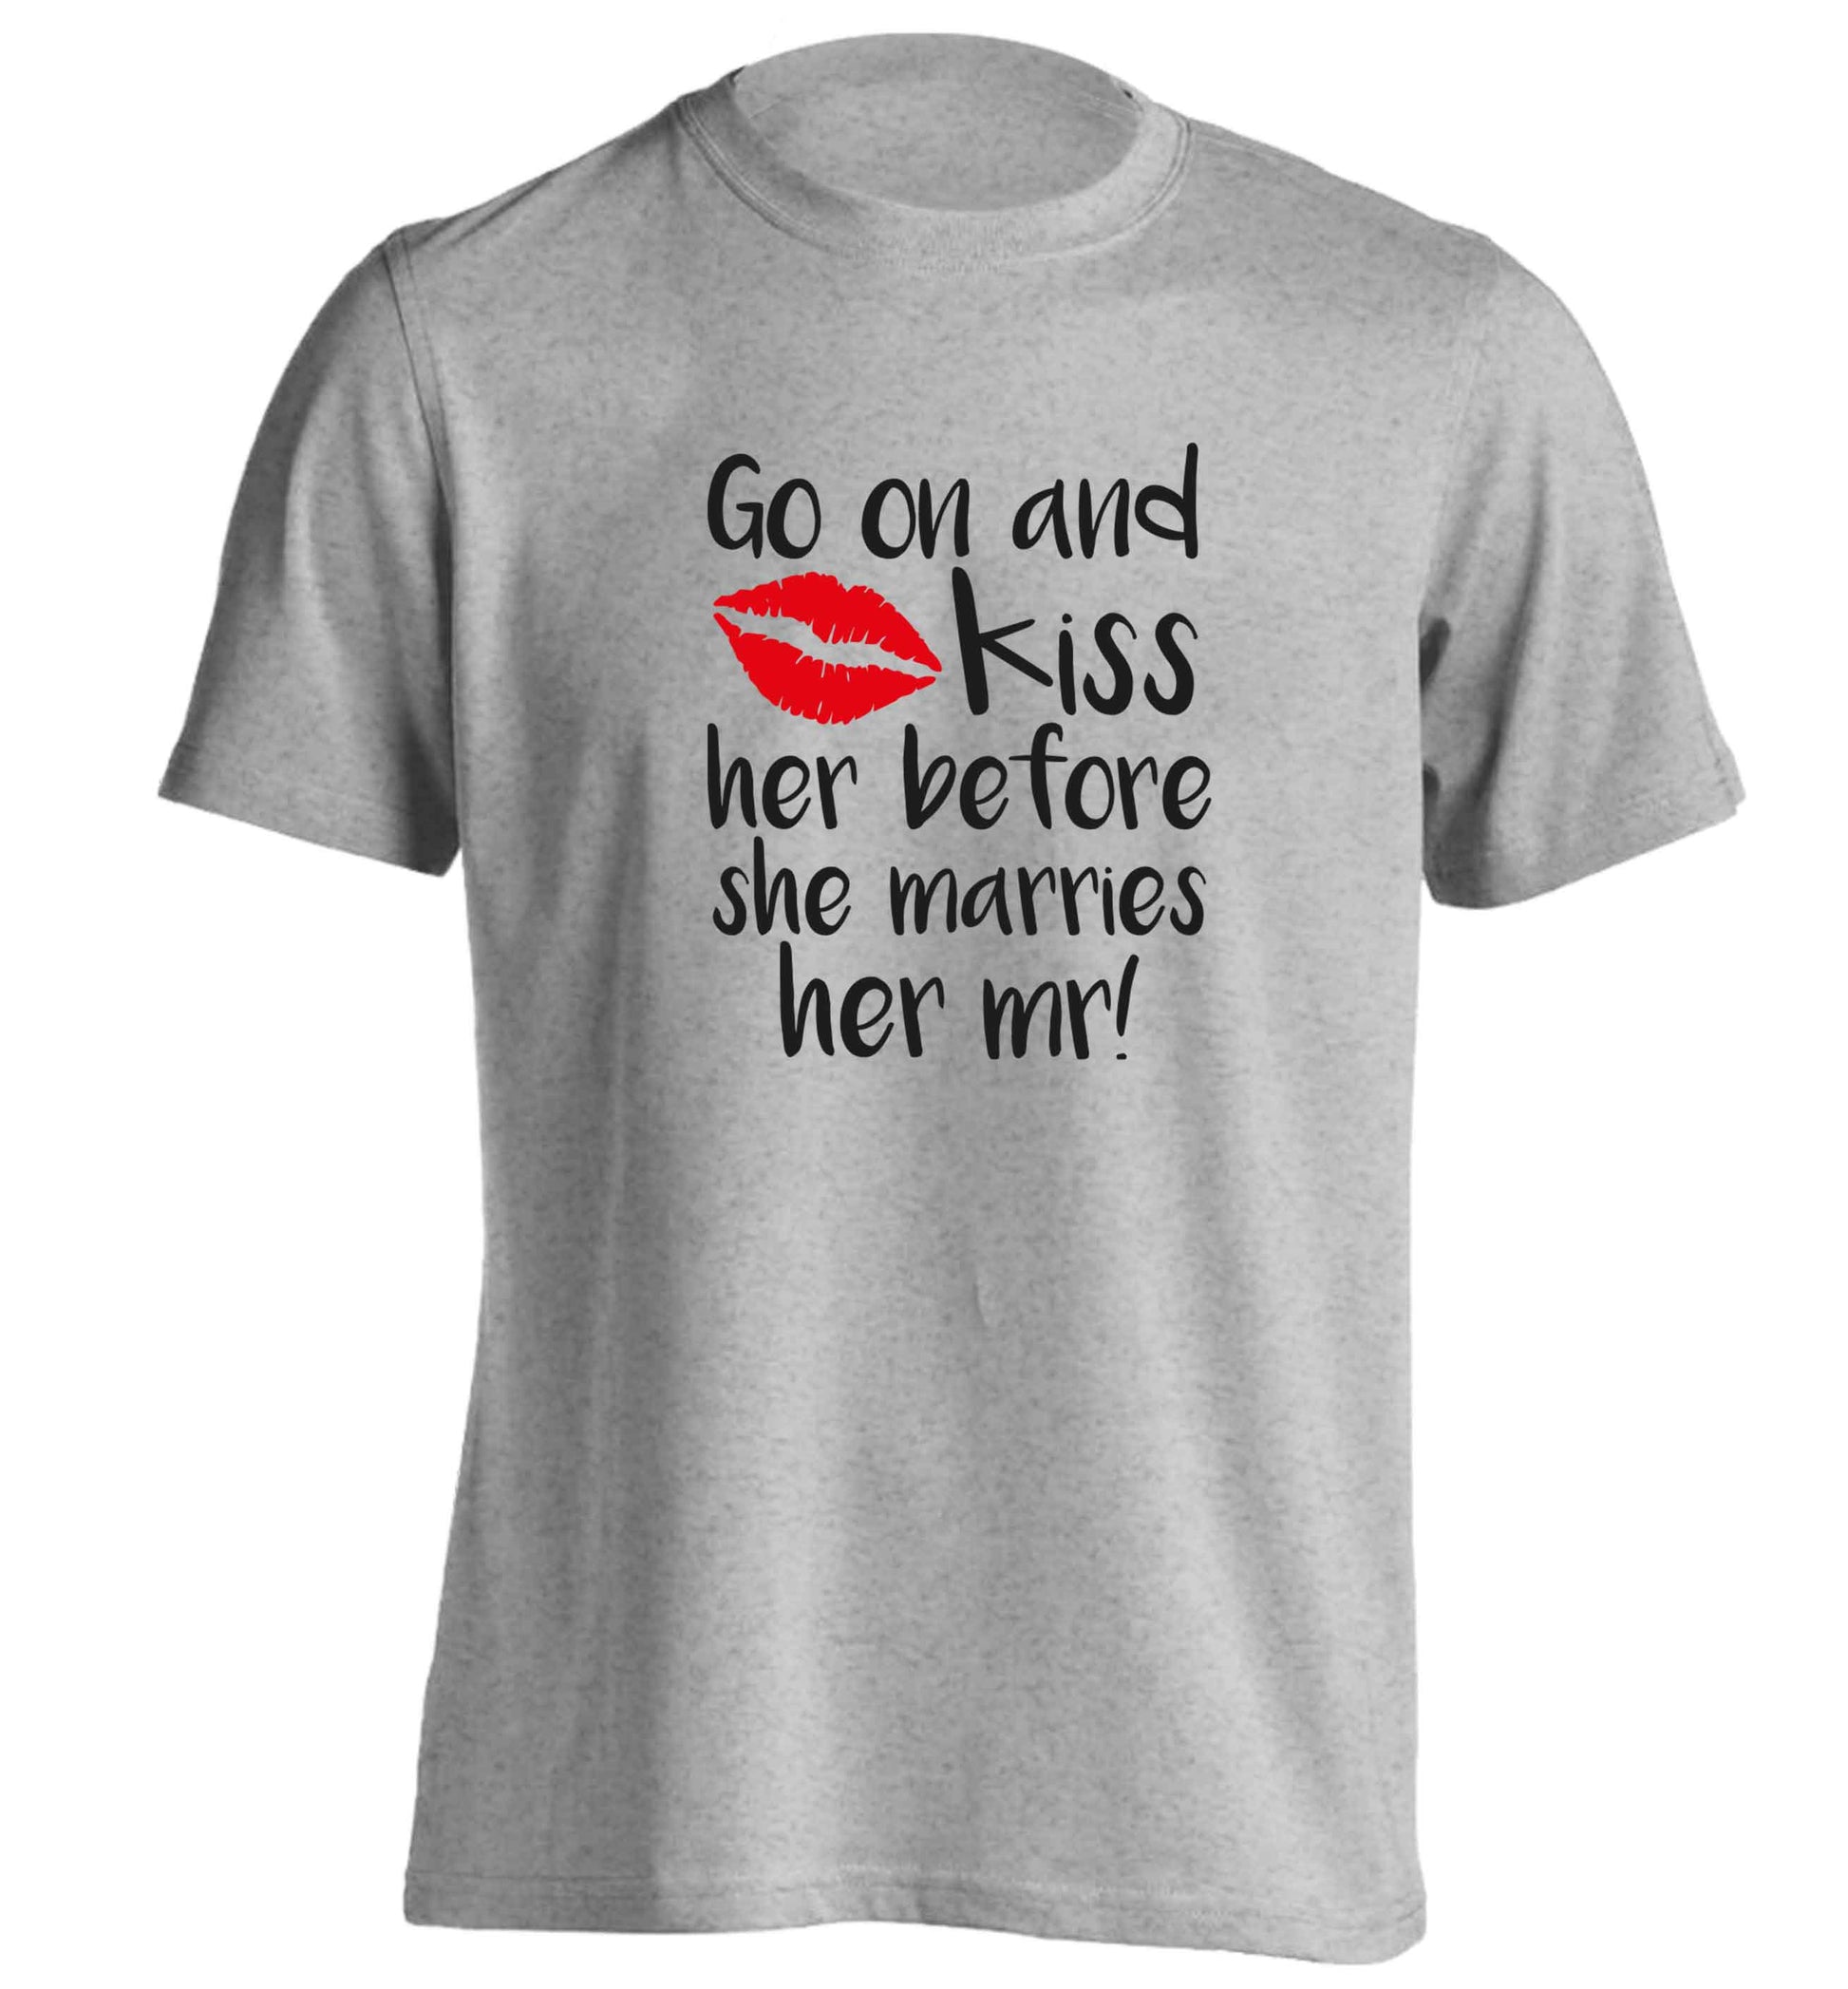 Kiss her before she marries her mr! adults unisex grey Tshirt 2XL